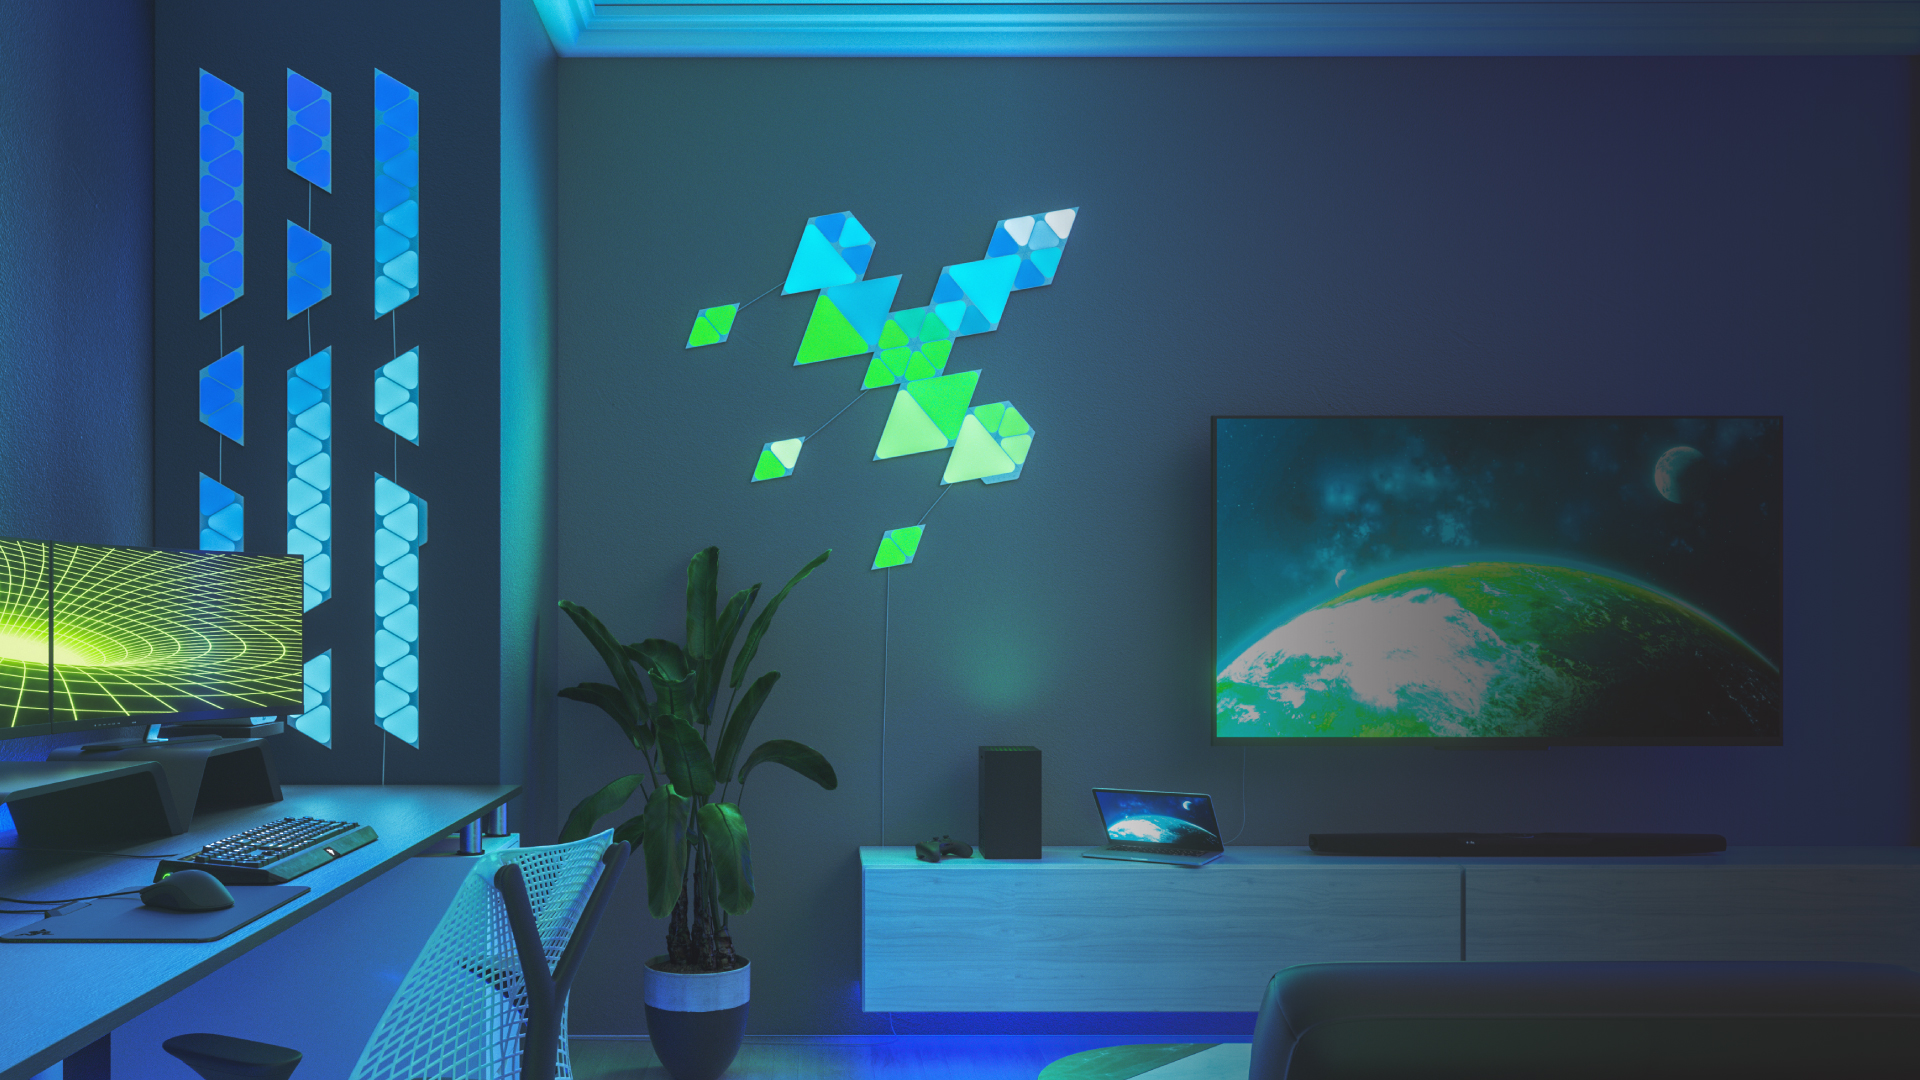 This is an image of Nanoleaf Shapes Triangles and Mini Triangles on the wall beside the left hand side of the TV in a living room and Nanoleaf Shapes Mini Triangles on a separate wall. The RGB light designs are connected together with linkers and flex linkers and mounted onto the wall with double-sided tape. The perfect living room lights for creating the ultimate entertainment experience.